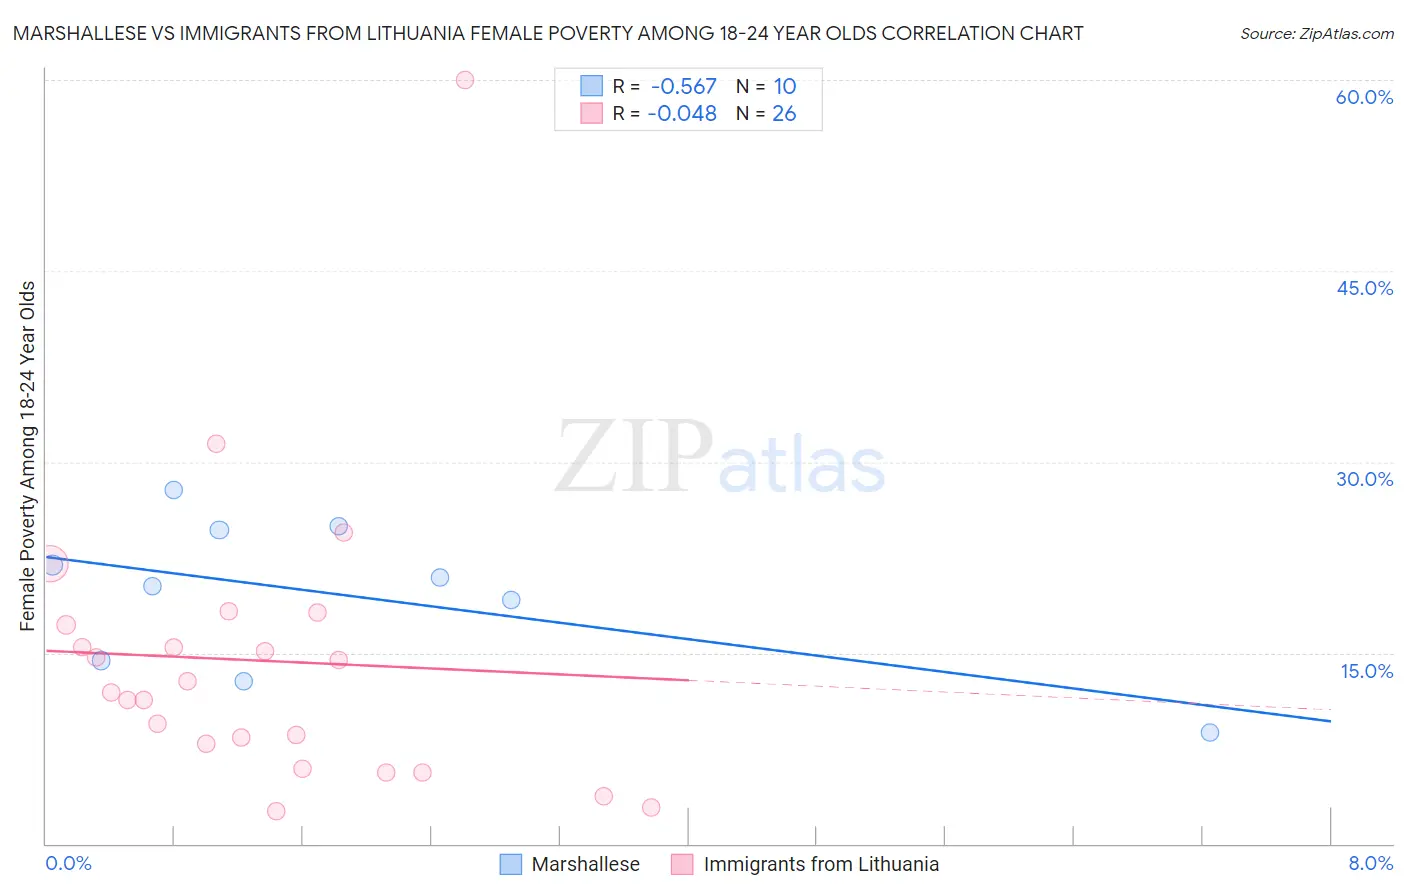 Marshallese vs Immigrants from Lithuania Female Poverty Among 18-24 Year Olds